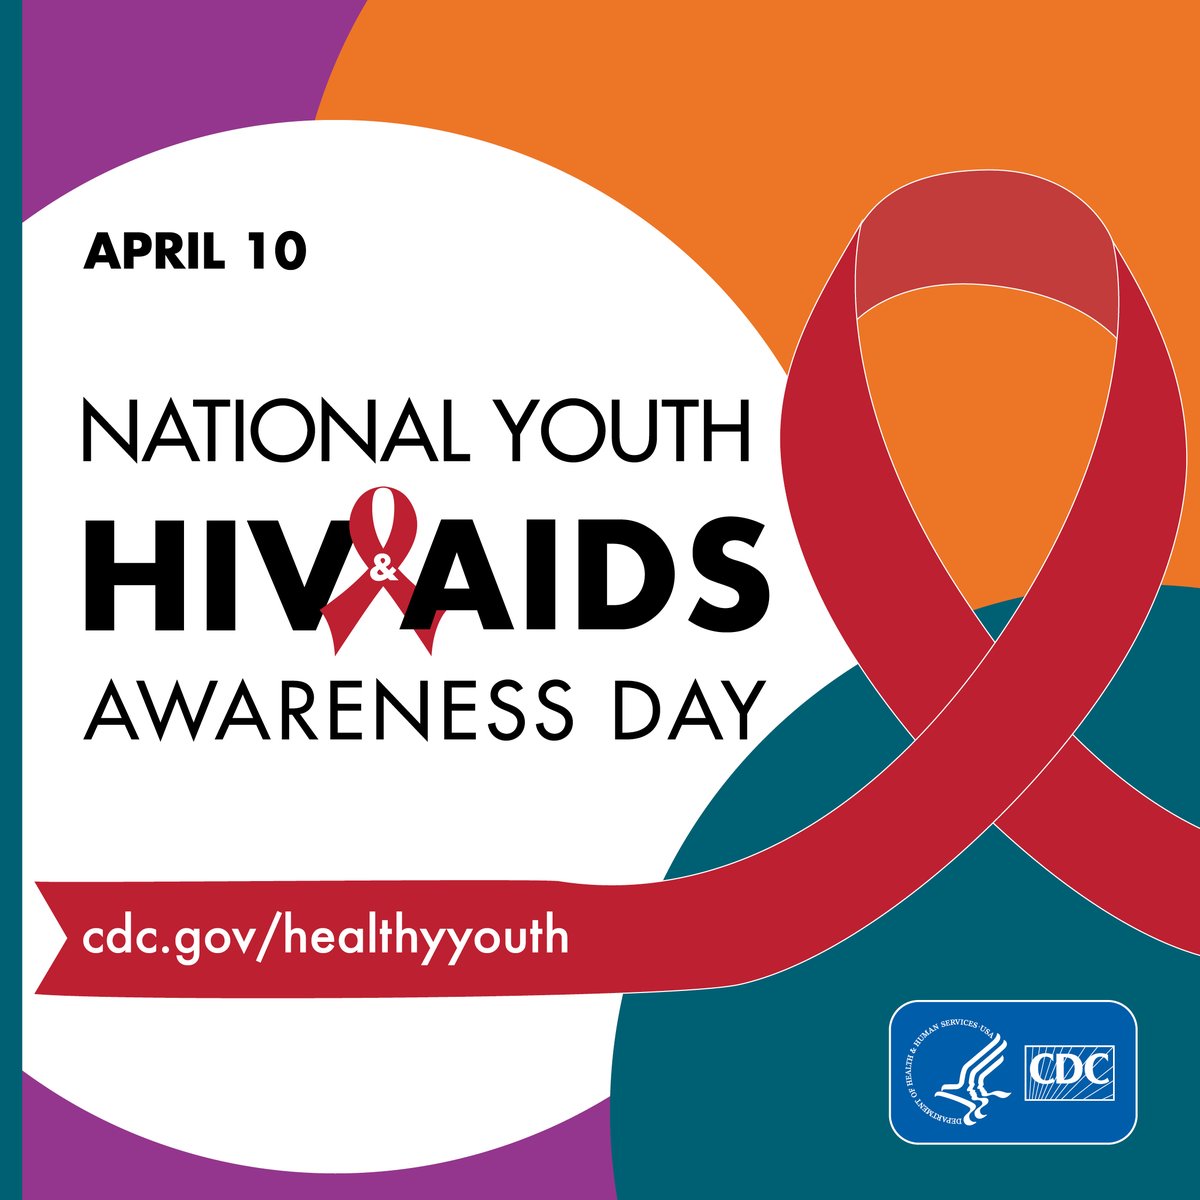 Did you know that 1 in 5 new HIV diagnoses occurs in young people ages 13-24? Equality Florida recognizes today as National Youth HIV & AIDS Awareness Day. Explore more from @CDC_DASH: bit.ly/3PkoZ0u